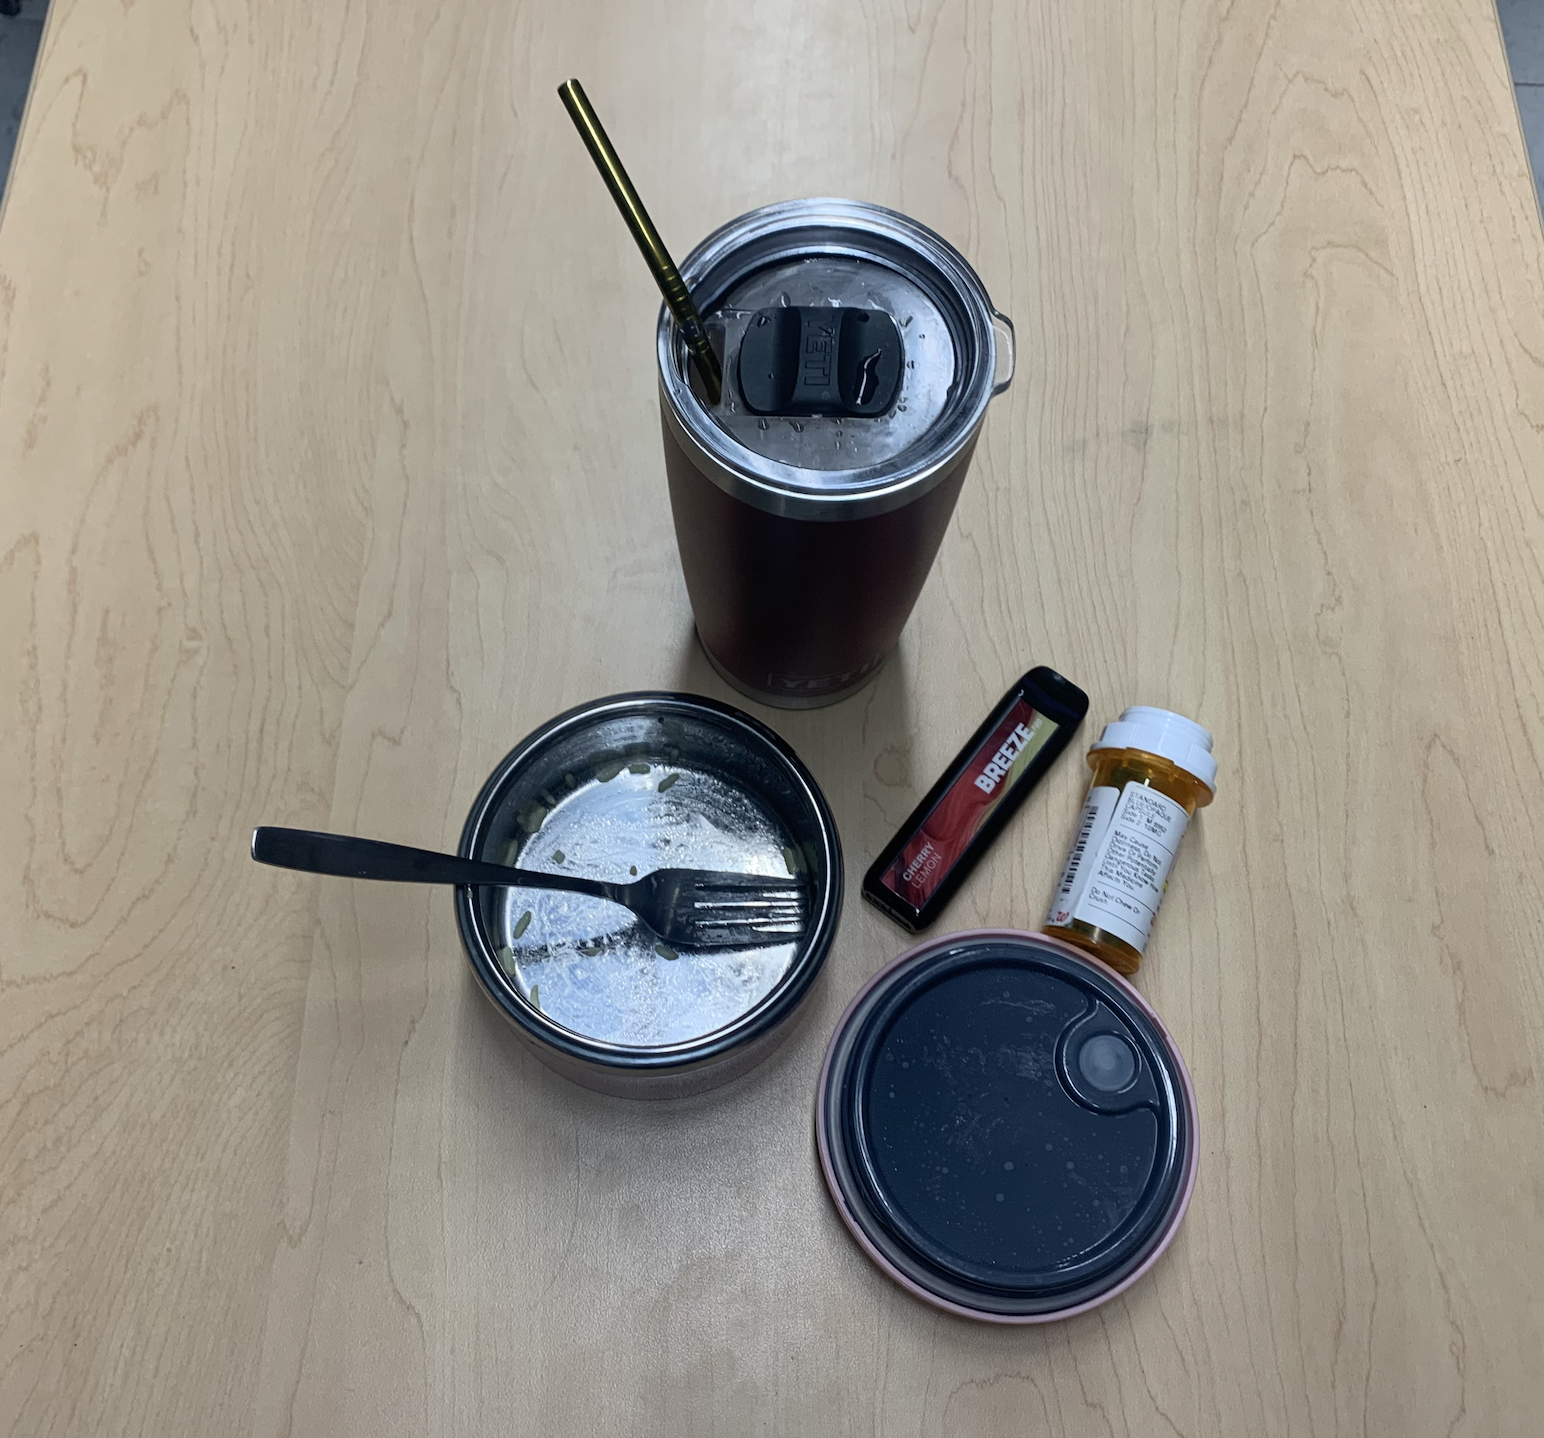 Cup, vape, prescription bottle, and empty food container with fork on table